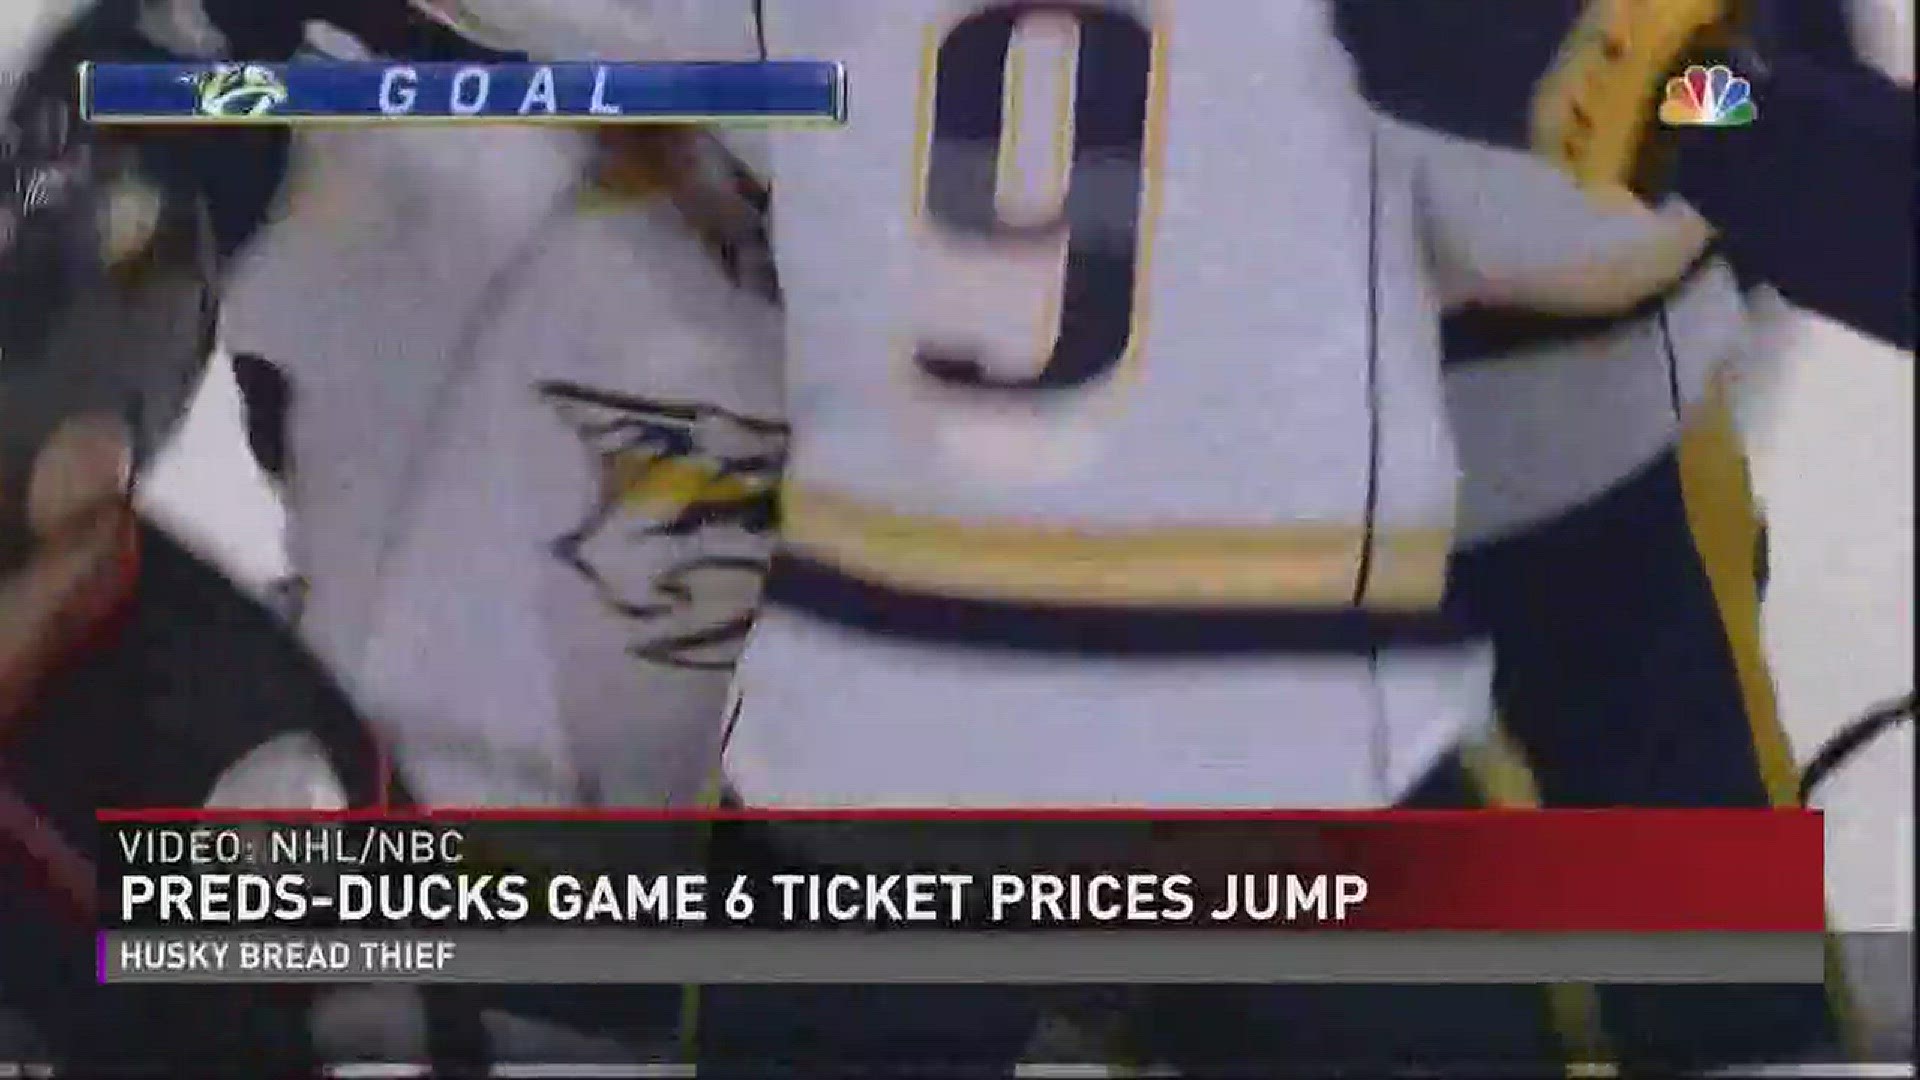 It'll cost you at least $300 to get in the door to watch the Nashville Predators potentially make history.